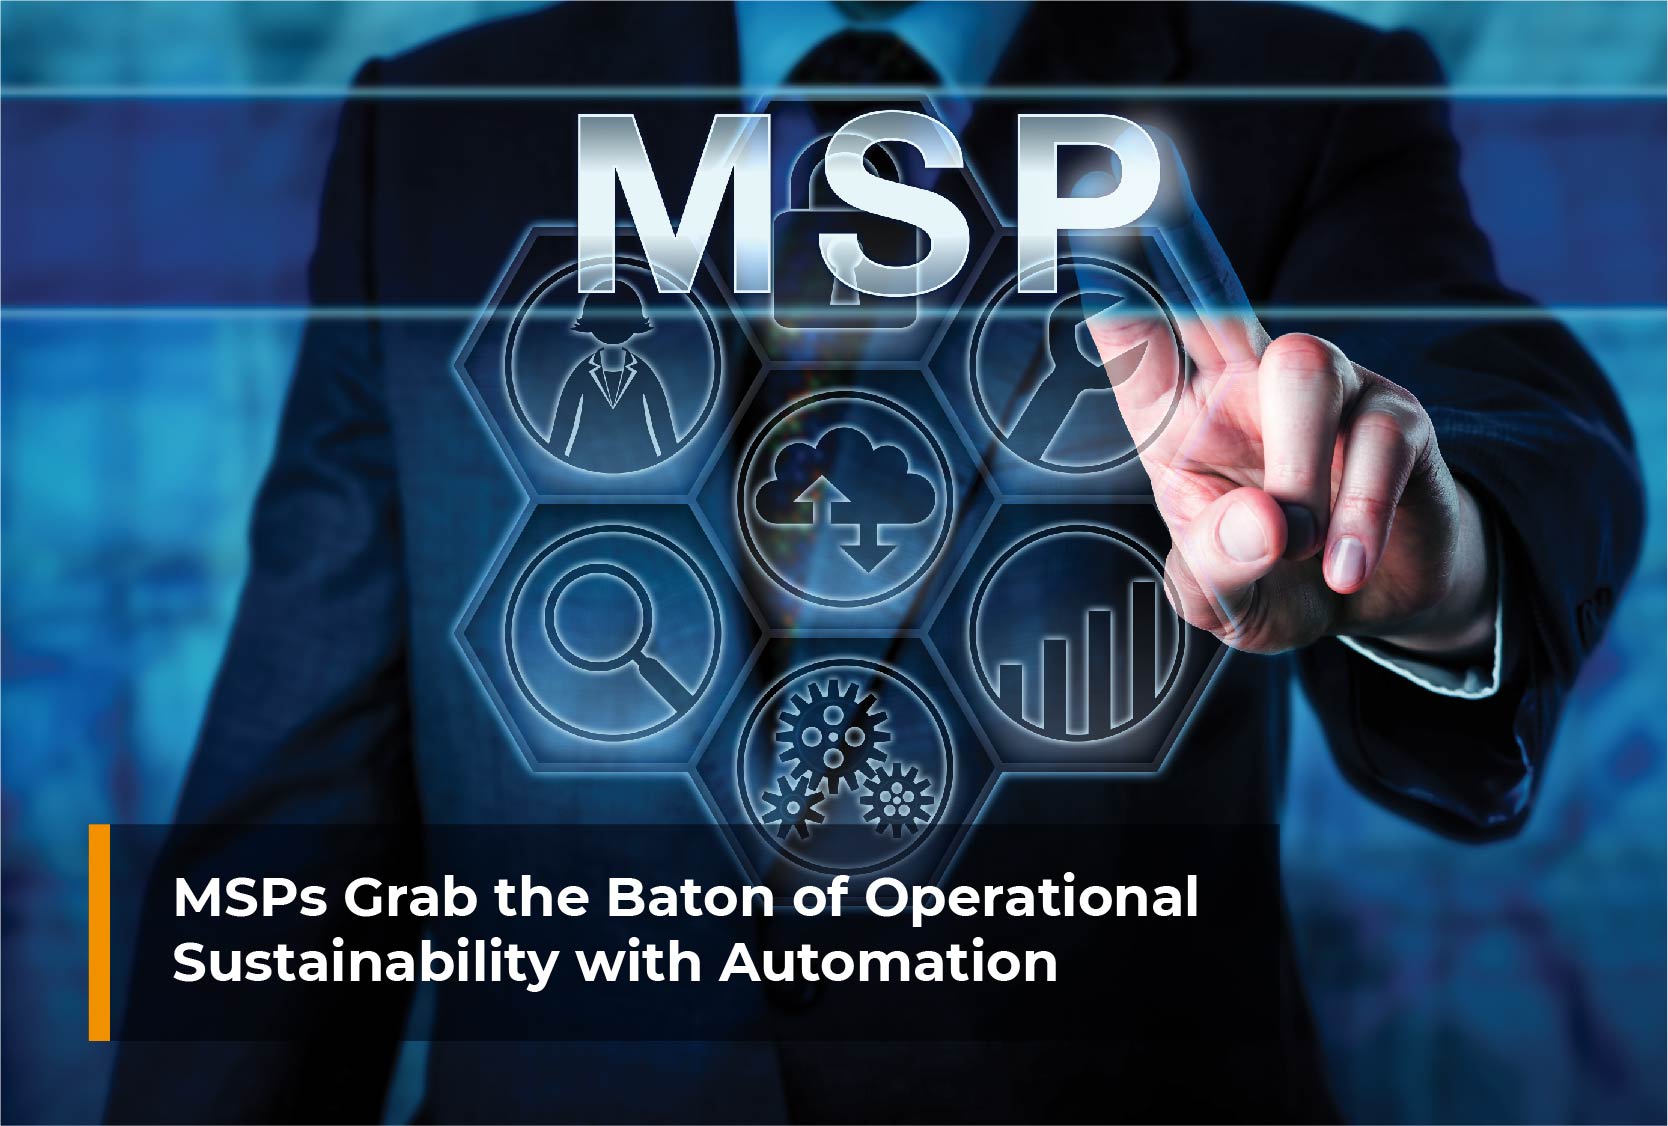 MSPs Grab the Baton of Operational Sustainability with Automation